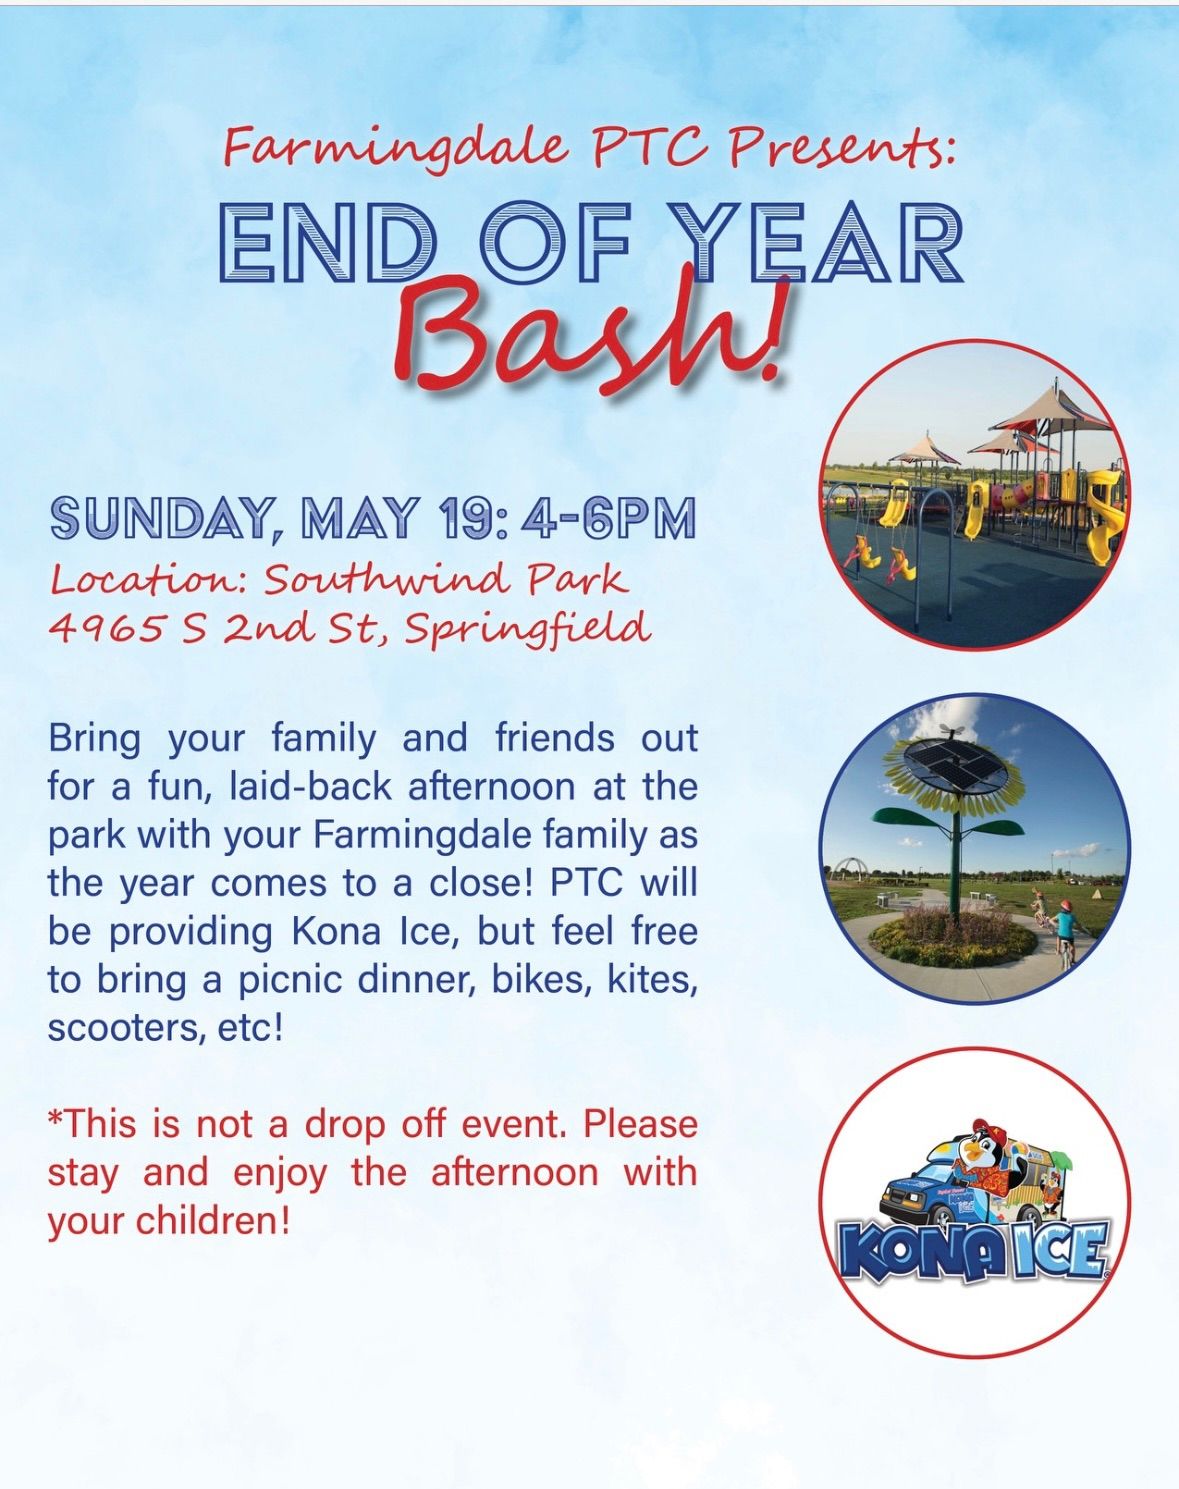 End of Year Bash